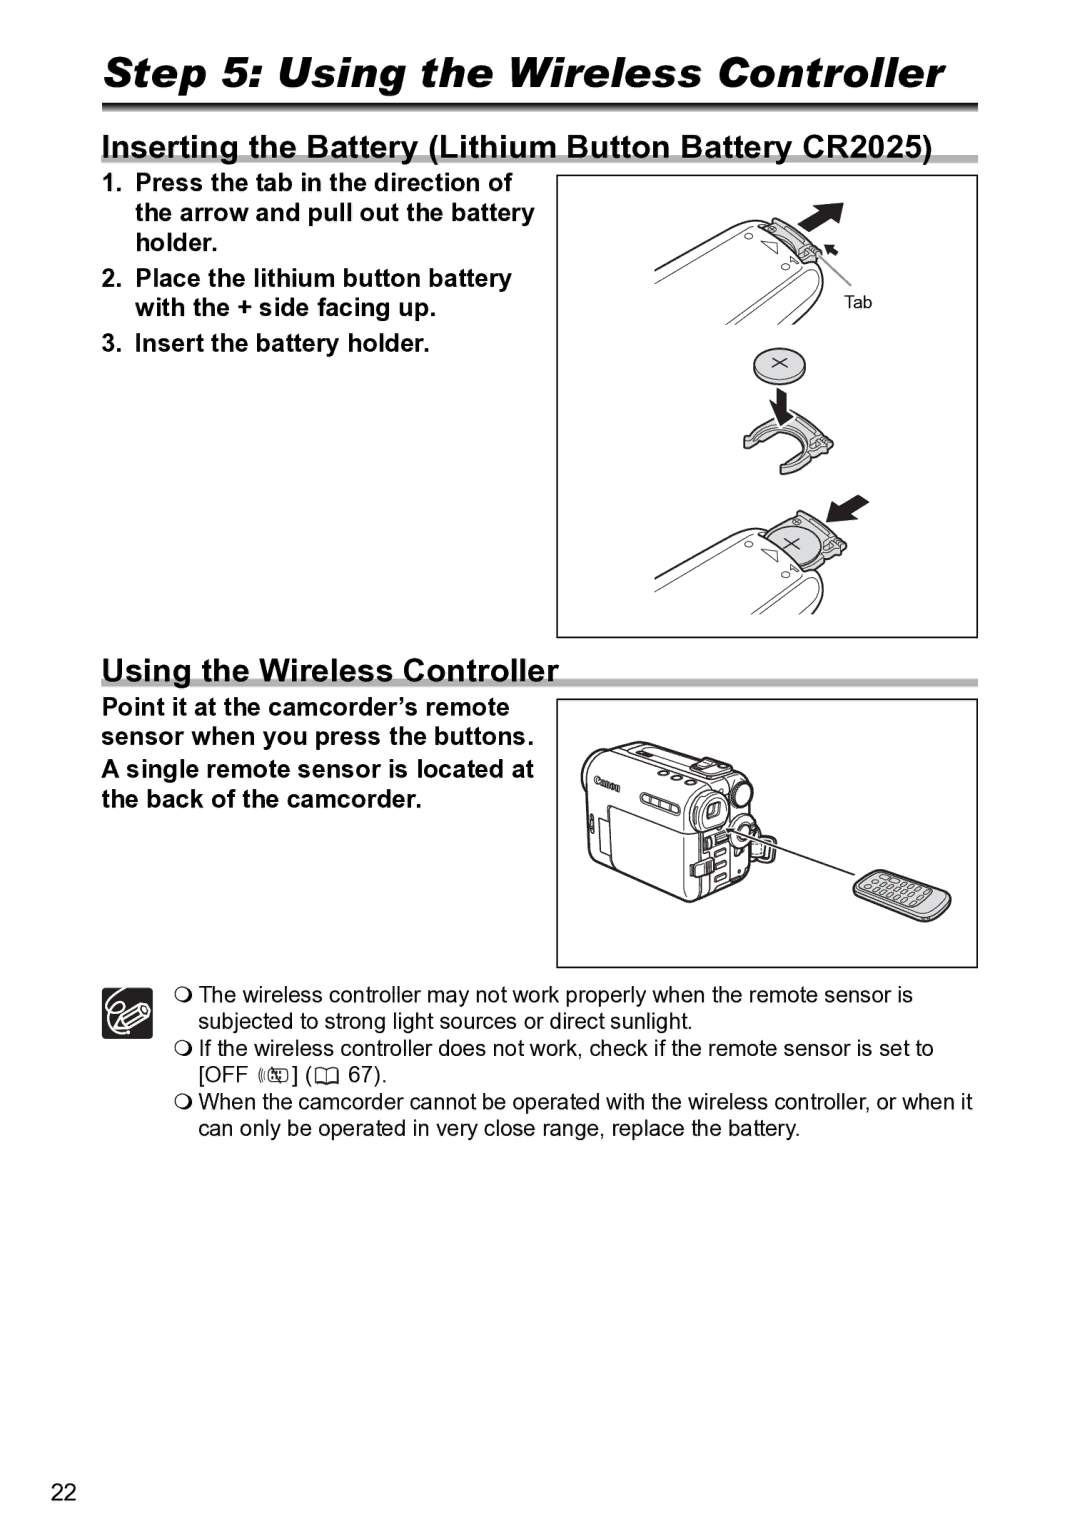 Canon S1 instruction manual Using the Wireless Controller, Inserting the Battery Lithium Button Battery CR2025 